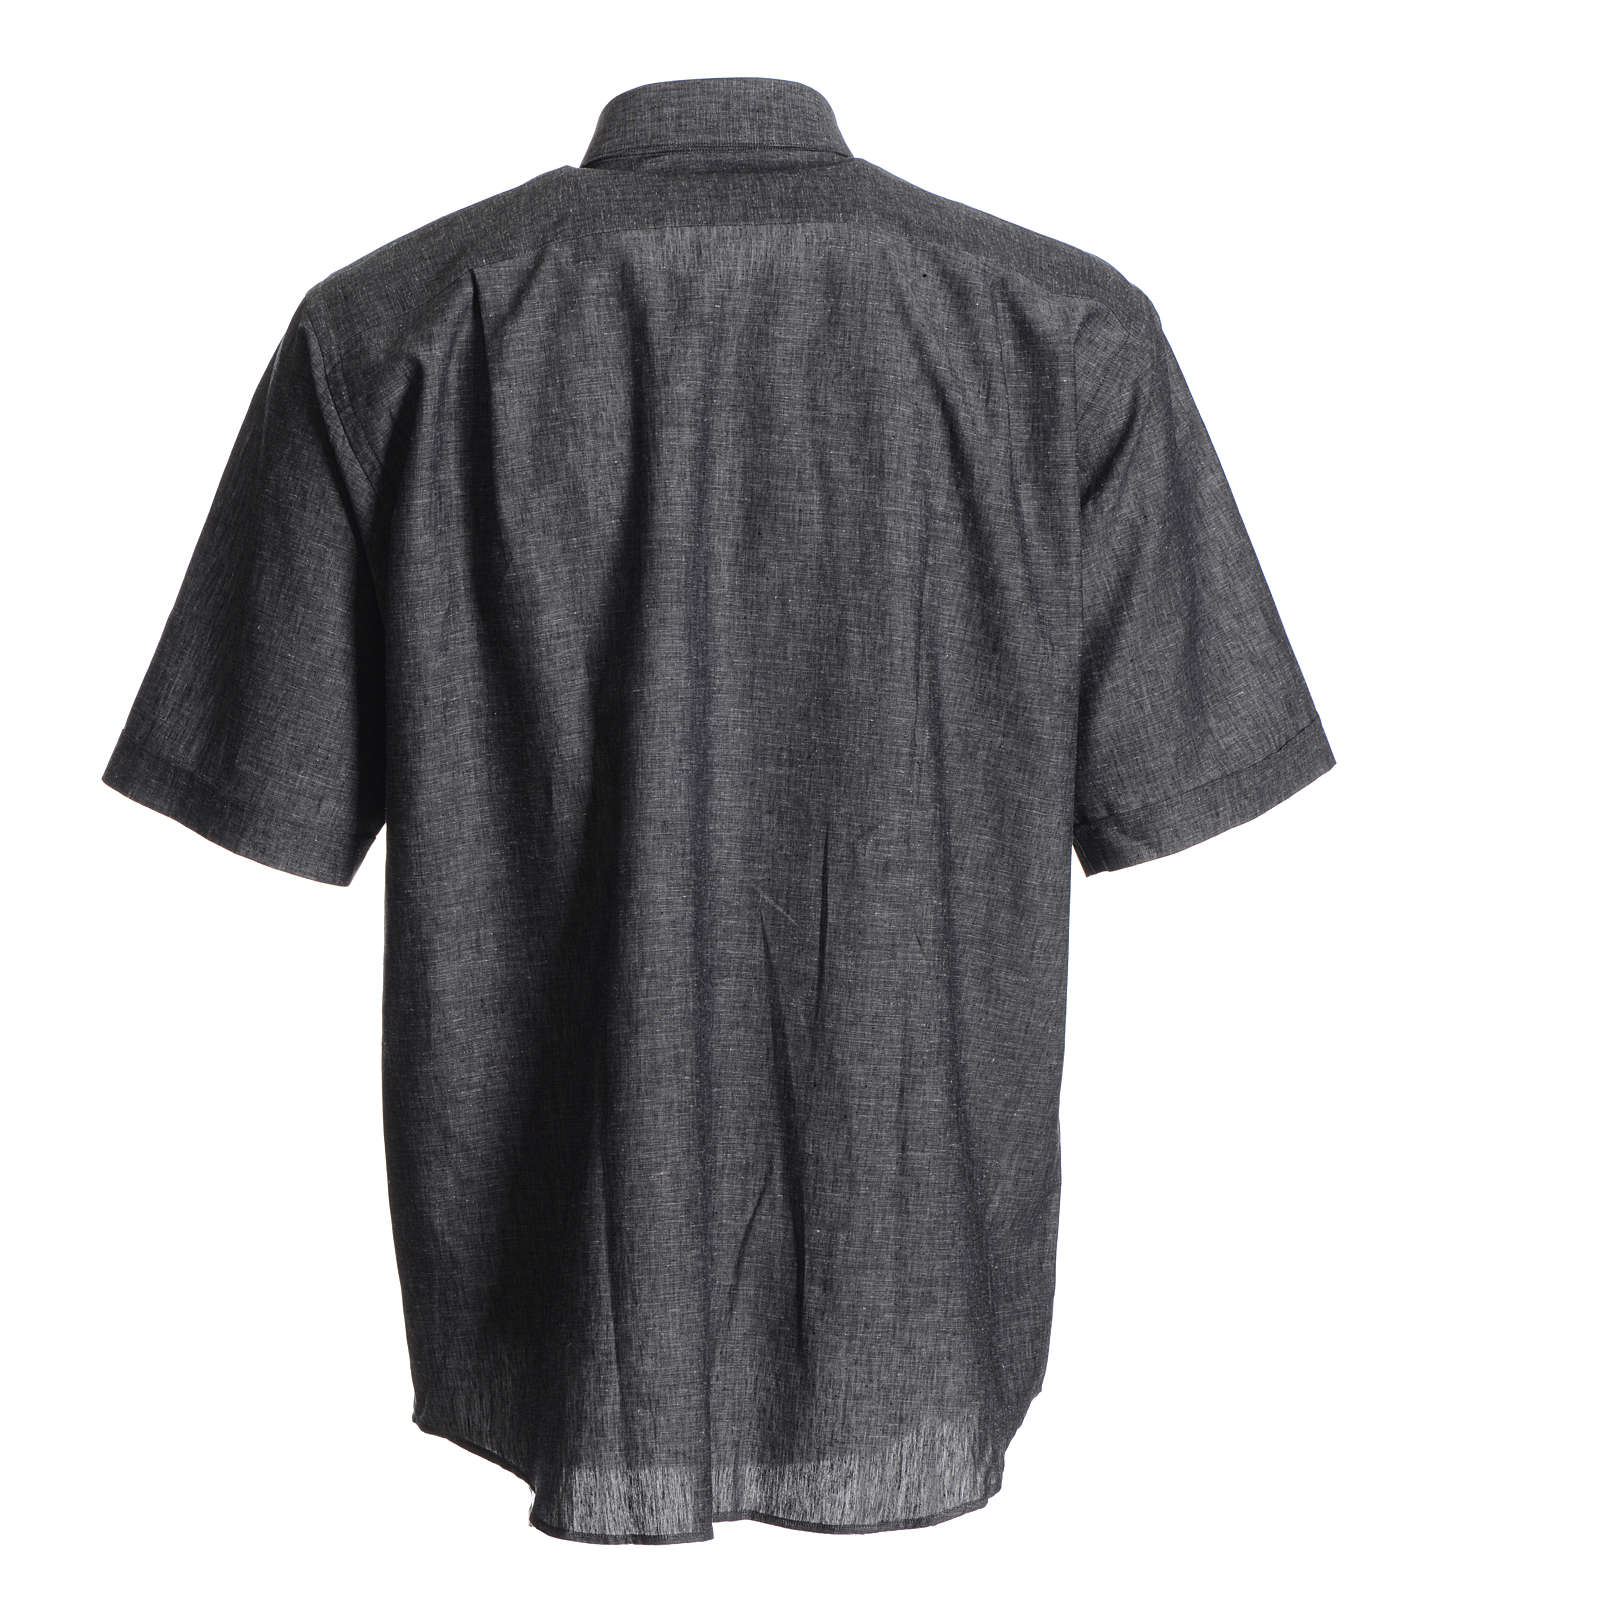 Clerical shirt in grey linen and cotton | online sales on HOLYART.co.uk